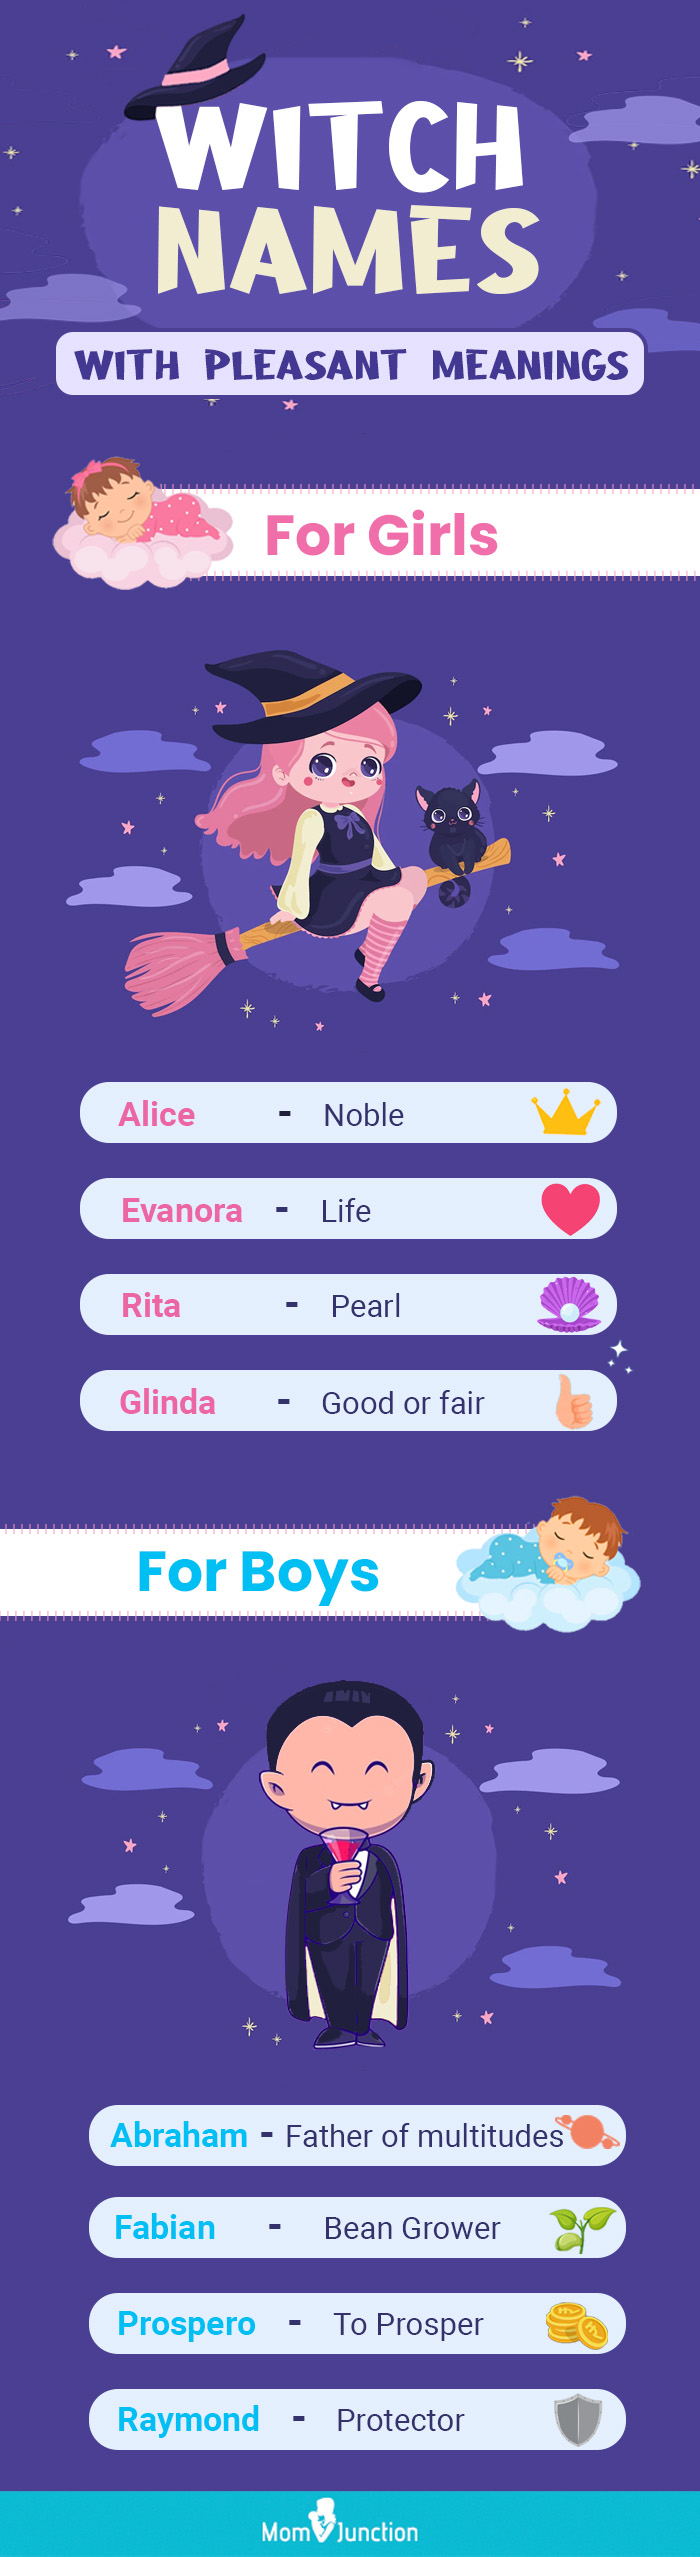 witch names with plesant meaning (infographic)